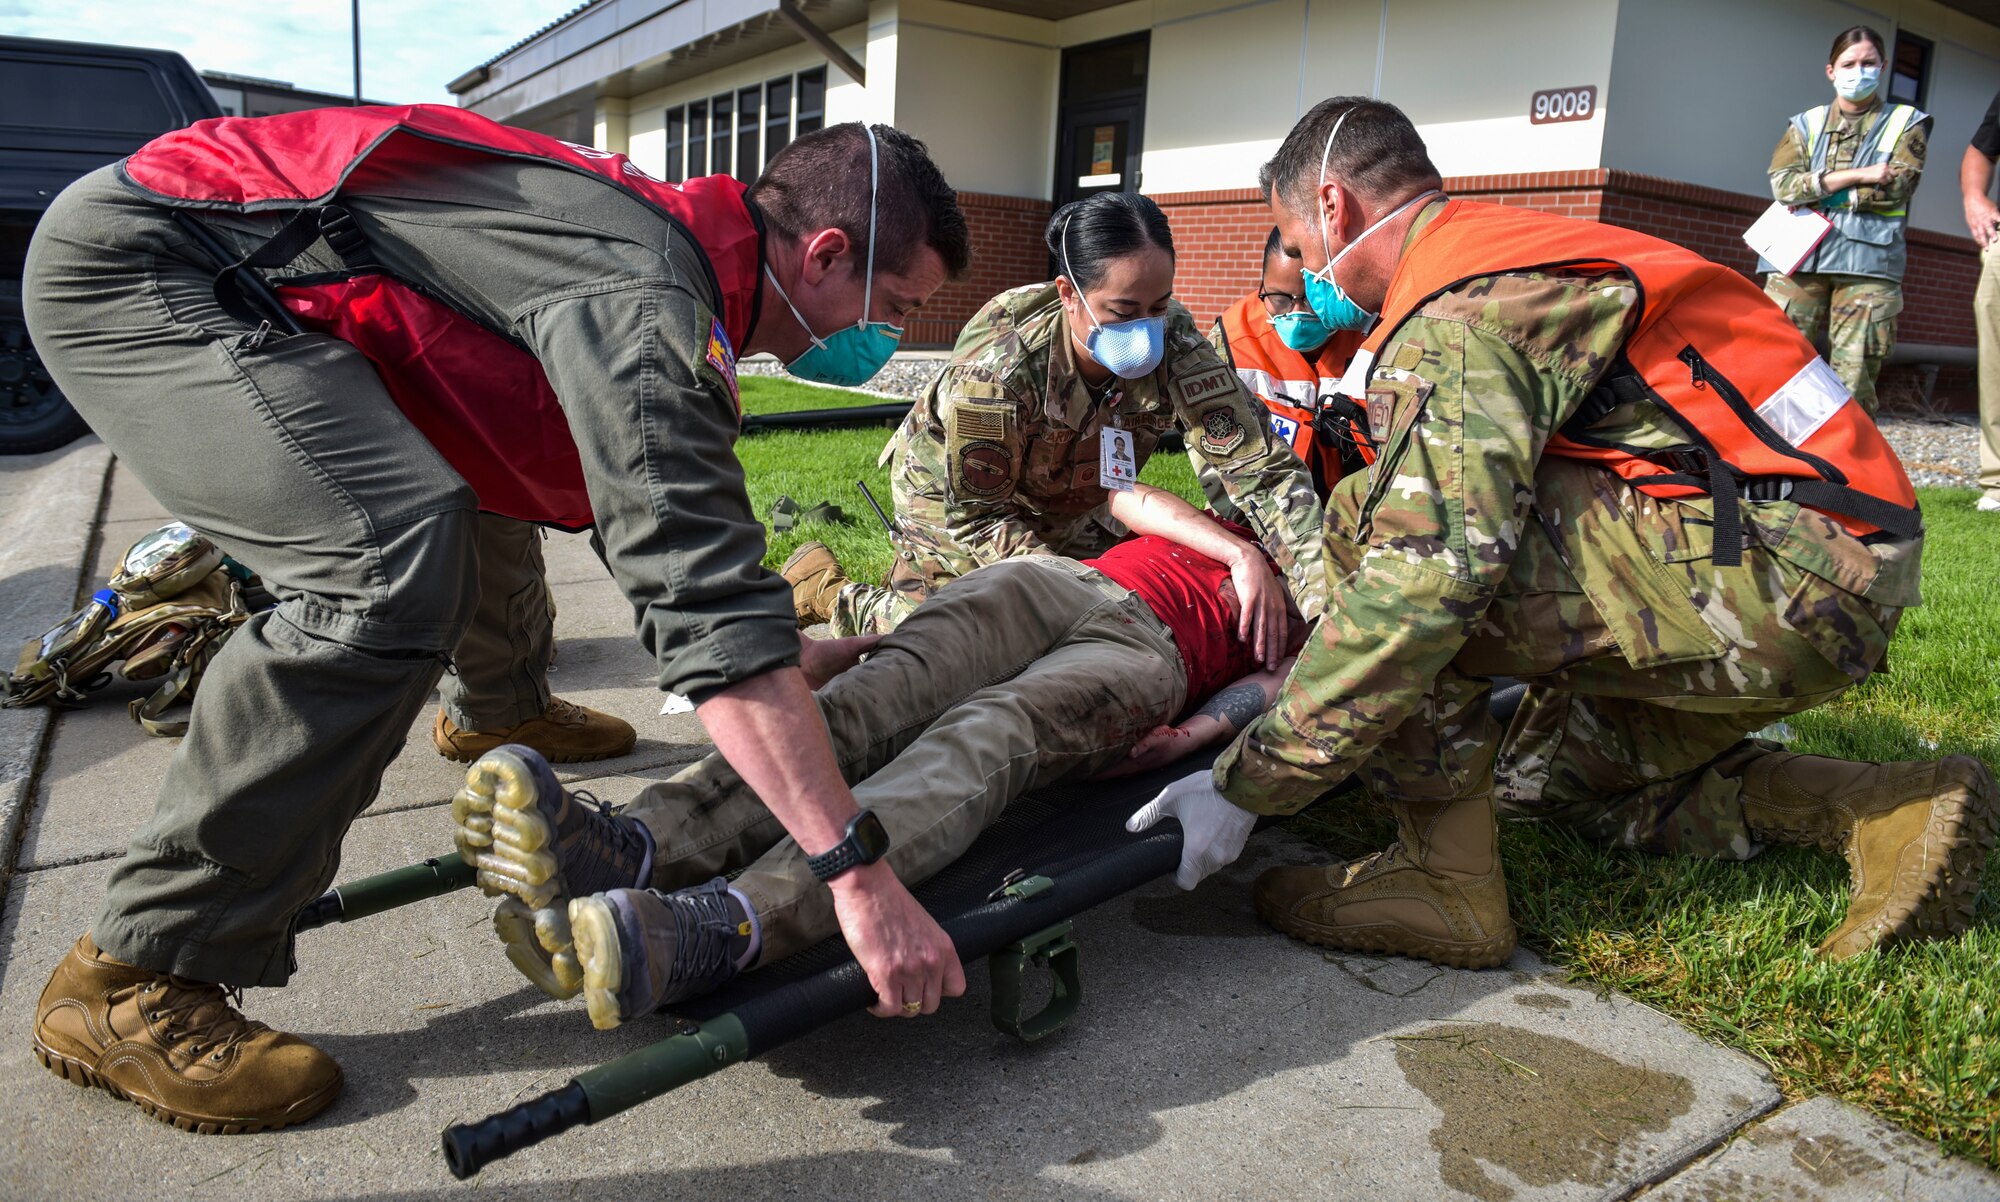 Members of the 92nd Medical Group place a simulated patient on a stretcher during Exercise Ready Eagle at Fairchild Air Force Base, Washington, Aug. 27, 2021.